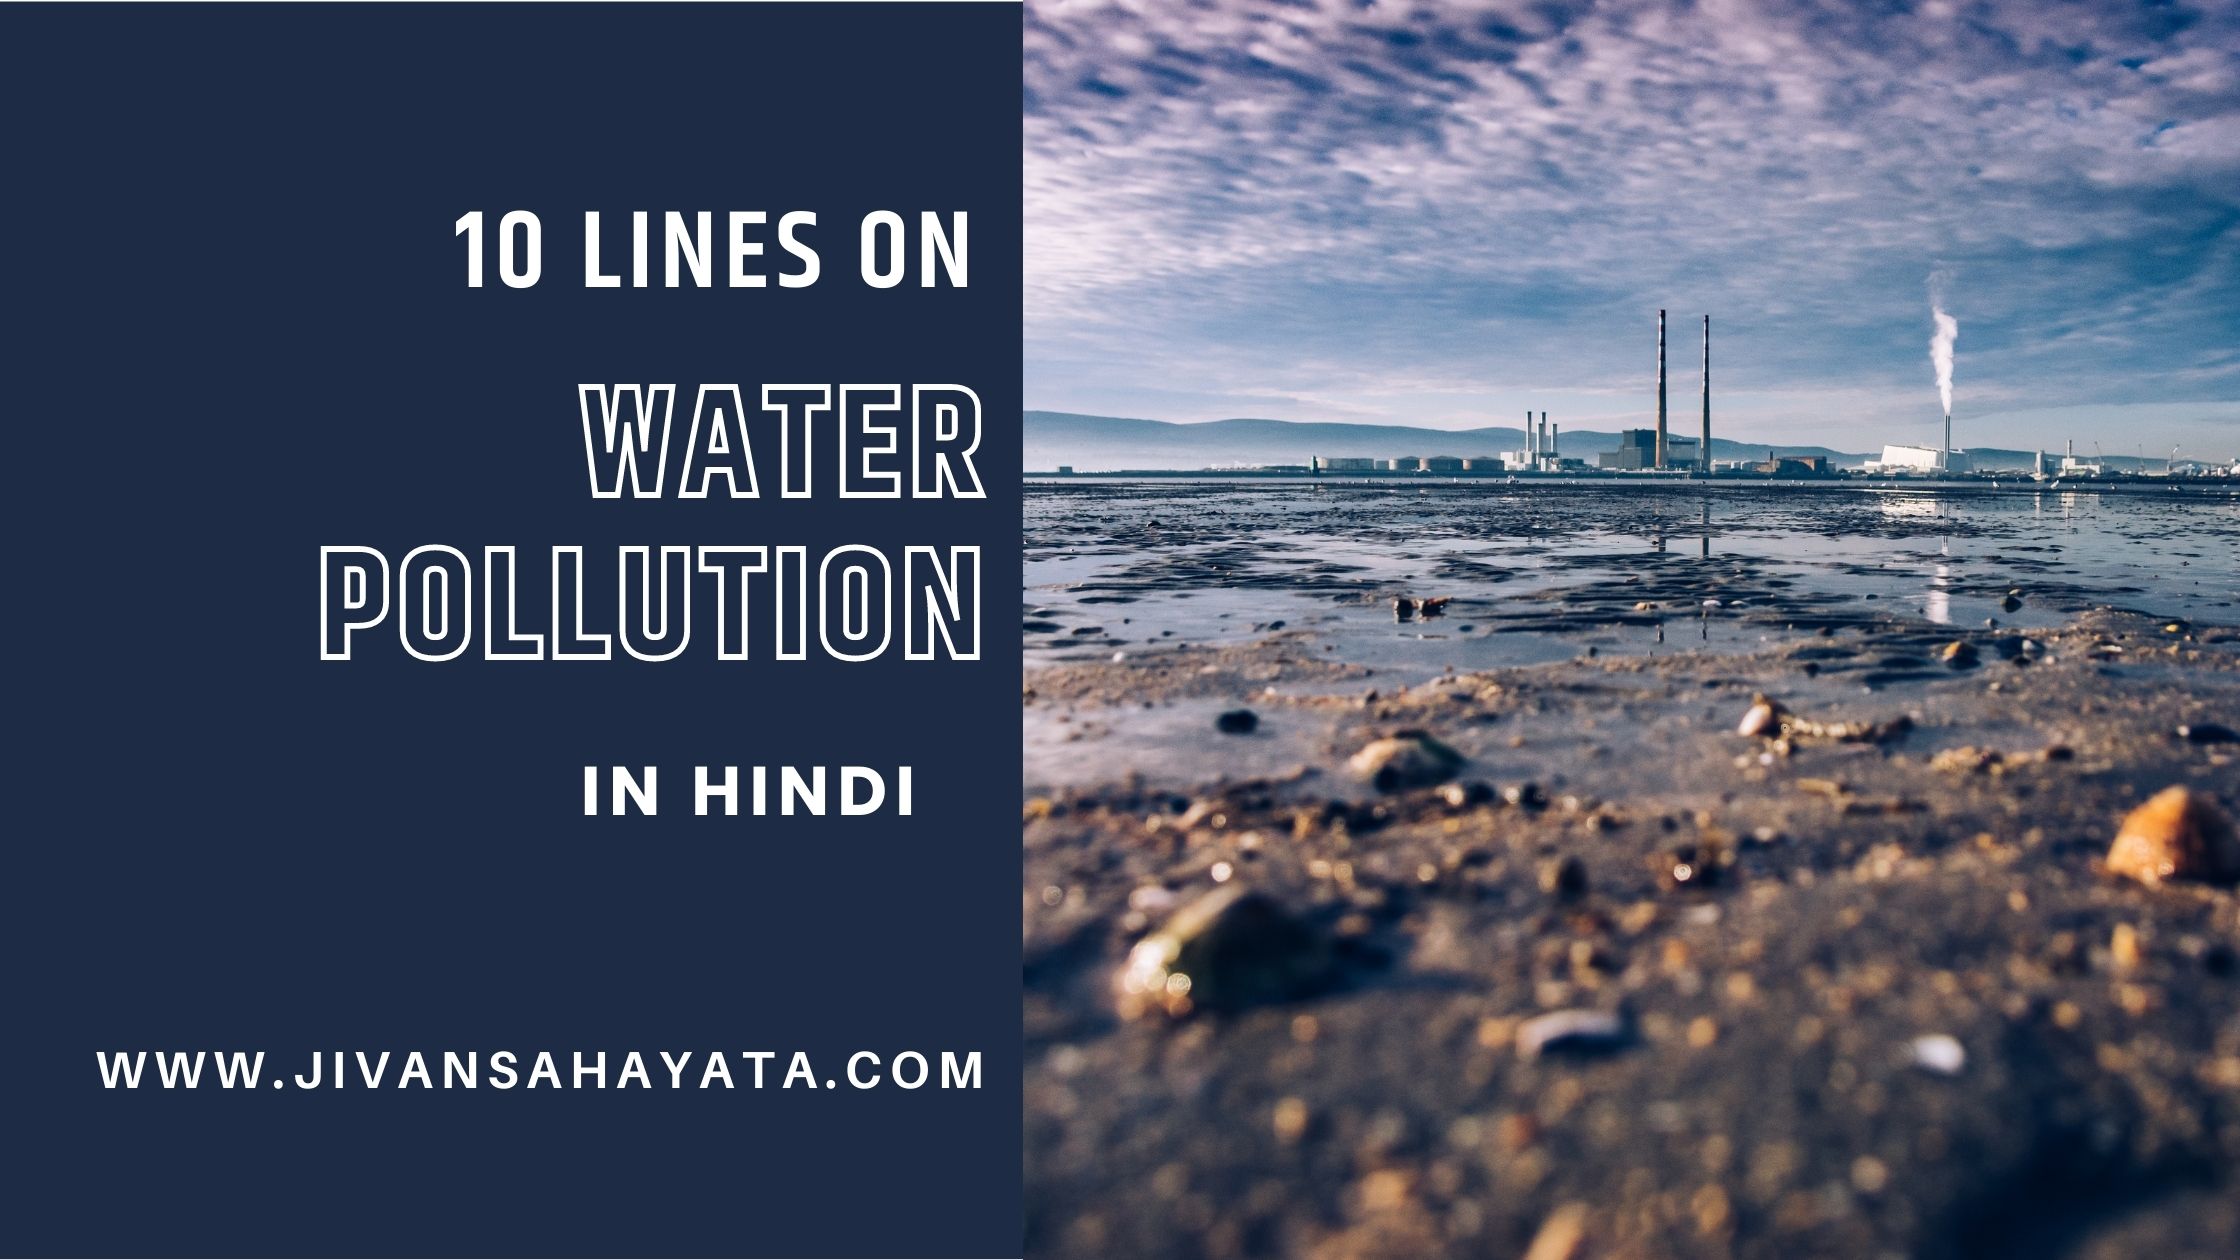 10 Lines On Water Pollution In Hindi